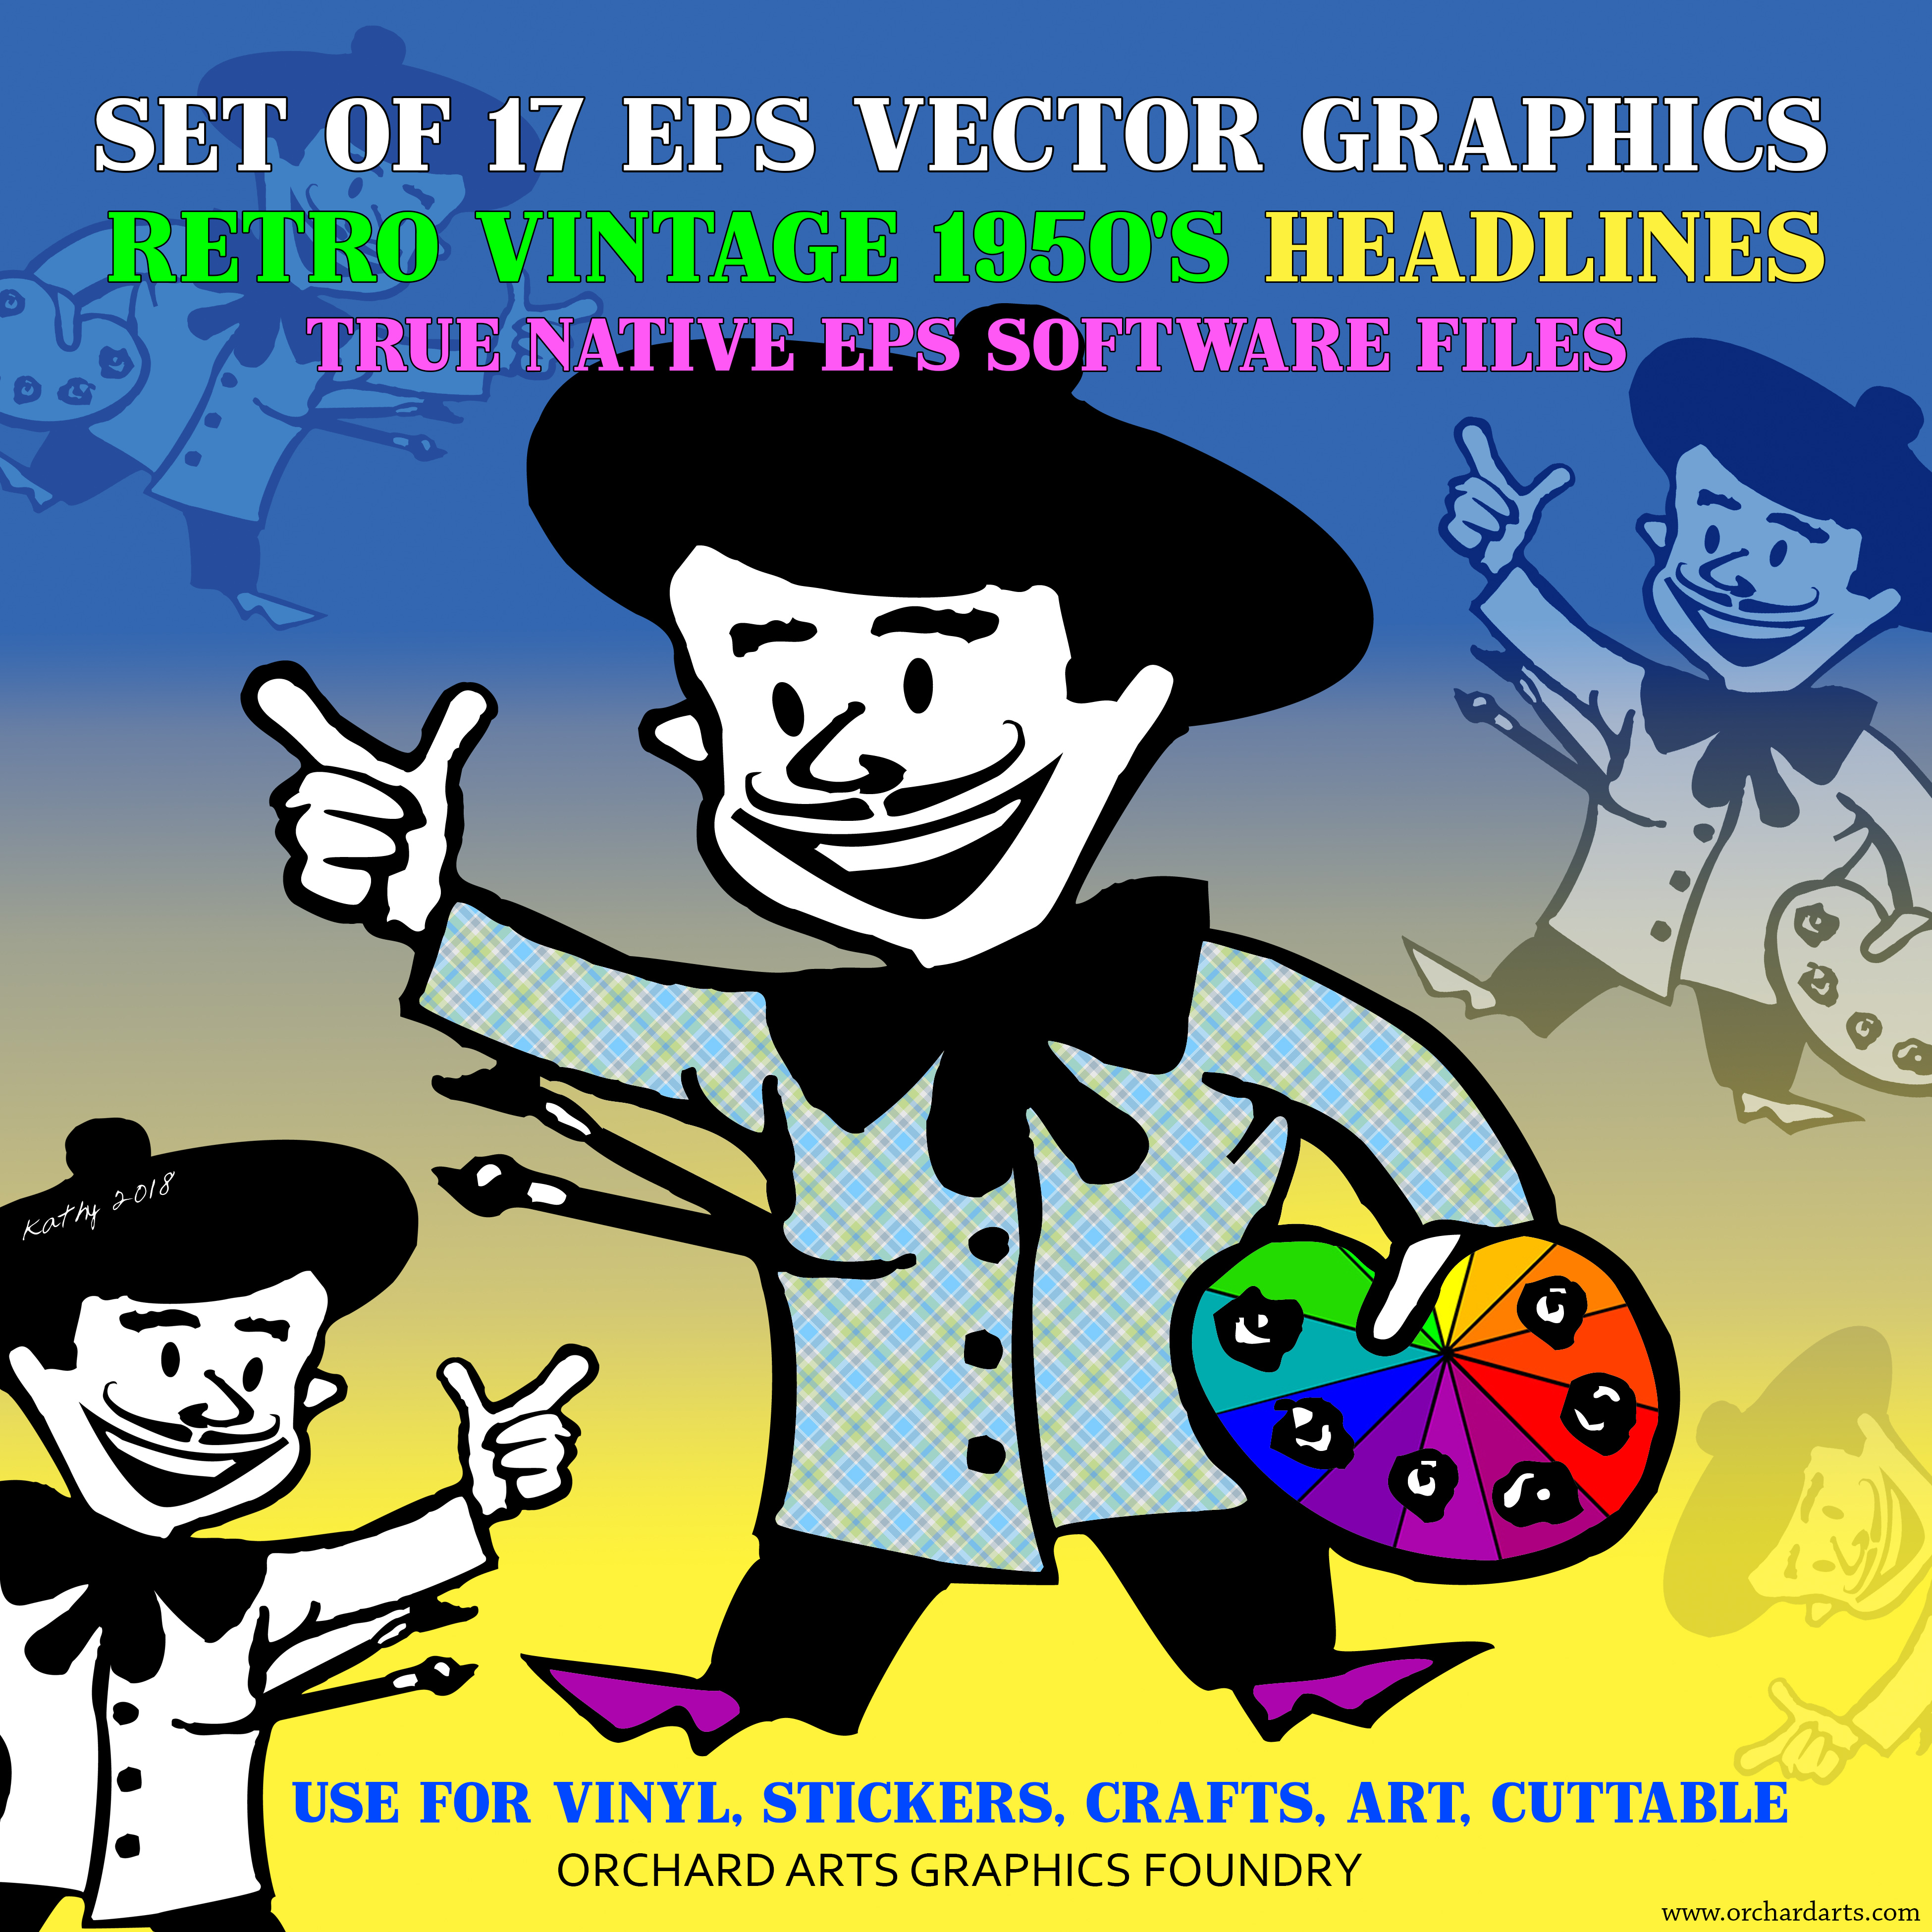 Set of 17 EPS Vector Graphics, Retro Vintage 1950's Headlines True Native EPS Software Files, Use for Vinyl, Stickers, Crafts, Art, Cuttable